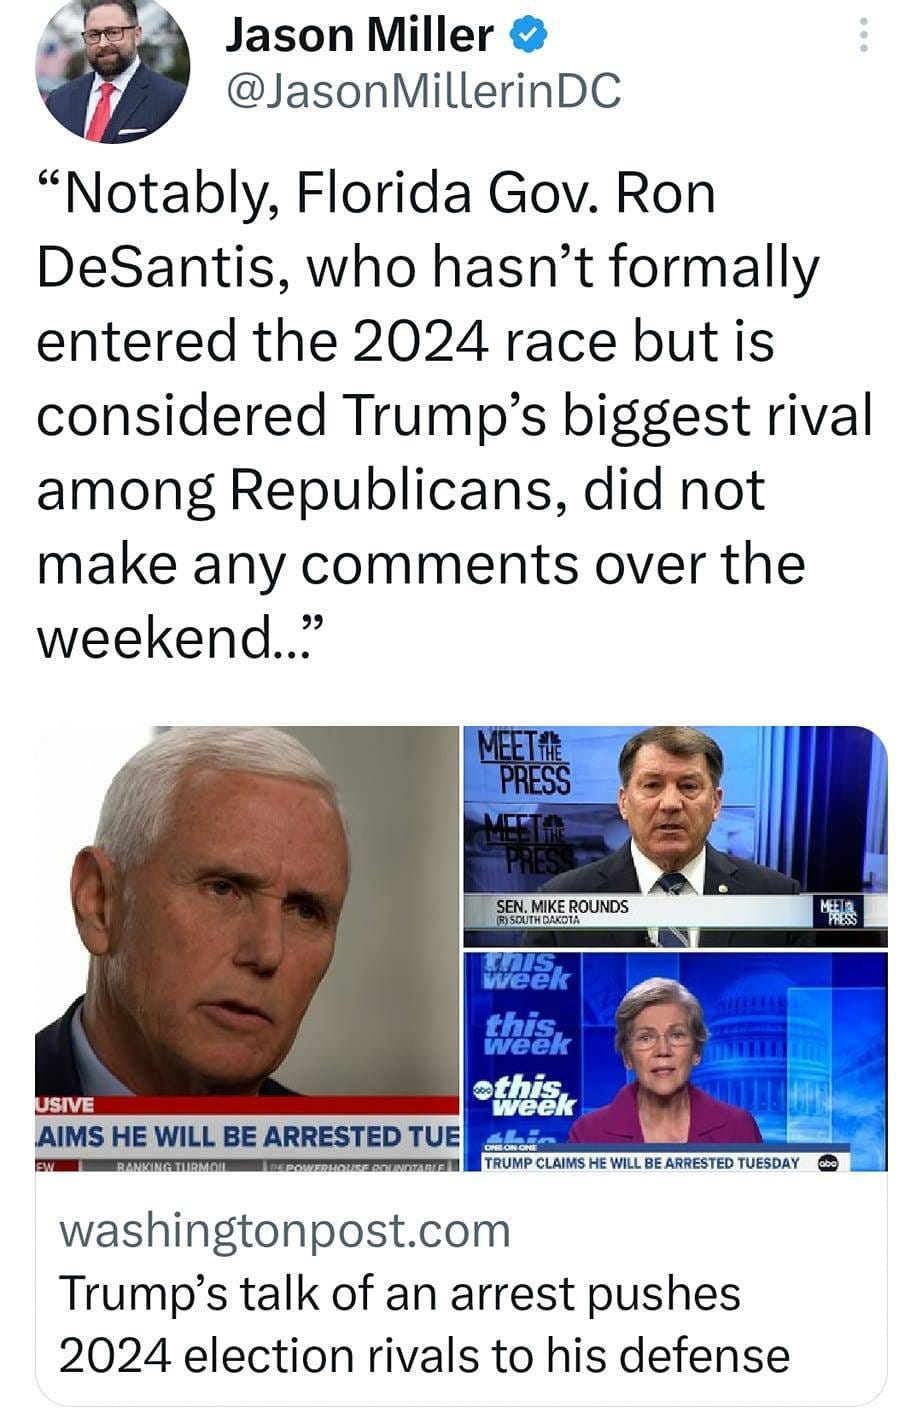 May be an image of 4 people and text that says 'Jason Miller @JasonMillerinDC "Notably, Florida Gov. Ron DeSantis, who hasn't formally entered the 2024 race but is considered Trump's biggest rival among Republicans, did not make any comments over the weekend.." MEETT PRESS MET ROUNDS )SOUTHDAKOTA WILL week this weel USIVE thiek AIMS He WILL BE ARRESTED TUE BANKINGTHRMOI TRUMP CLAIMS washingtonpost.com Trump's talk of an arrest pushes 2024 election rivals to his defense ARRESTED TUESDAY'